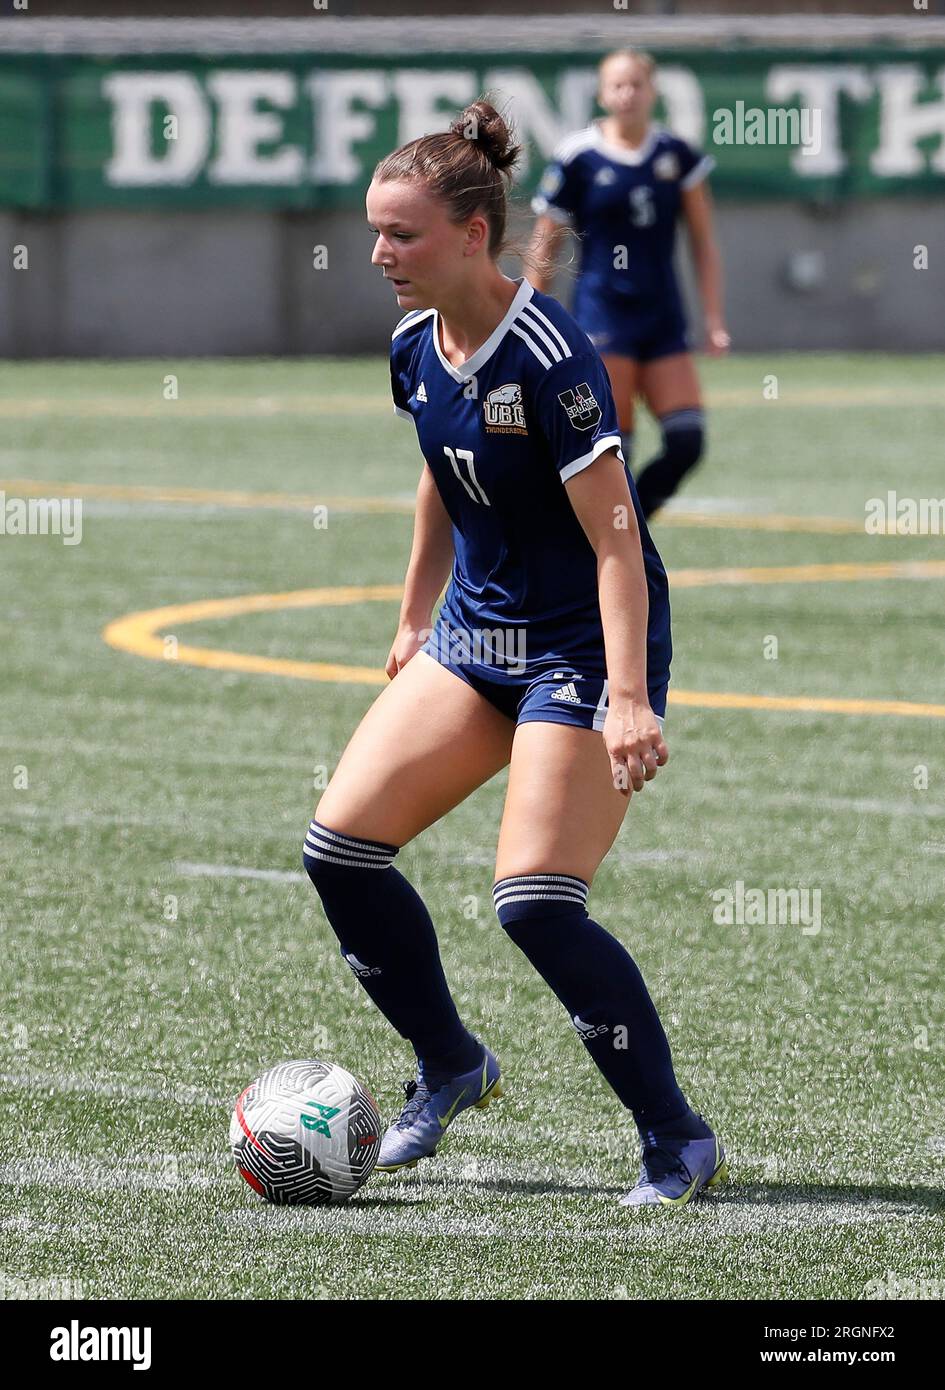 https://c8.alamy.com/comp/2RGNFX2/hillsboro-usa-10th-aug-2023-august-10-2023-british-columbia-defender-ava-ferreira-17-moves-the-ball-upfield-during-an-ncaa-exhibition-womens-soccer-match-between-the-portland-state-vikings-and-the-university-of-british-columbia-thunderbirds-at-hillsboro-stadium-hillsboro-or-larry-c-lawsoncsmsipa-usa-credit-image-larry-c-lawsoncal-sport-mediasipa-usa-credit-sipa-usalamy-live-news-2RGNFX2.jpg